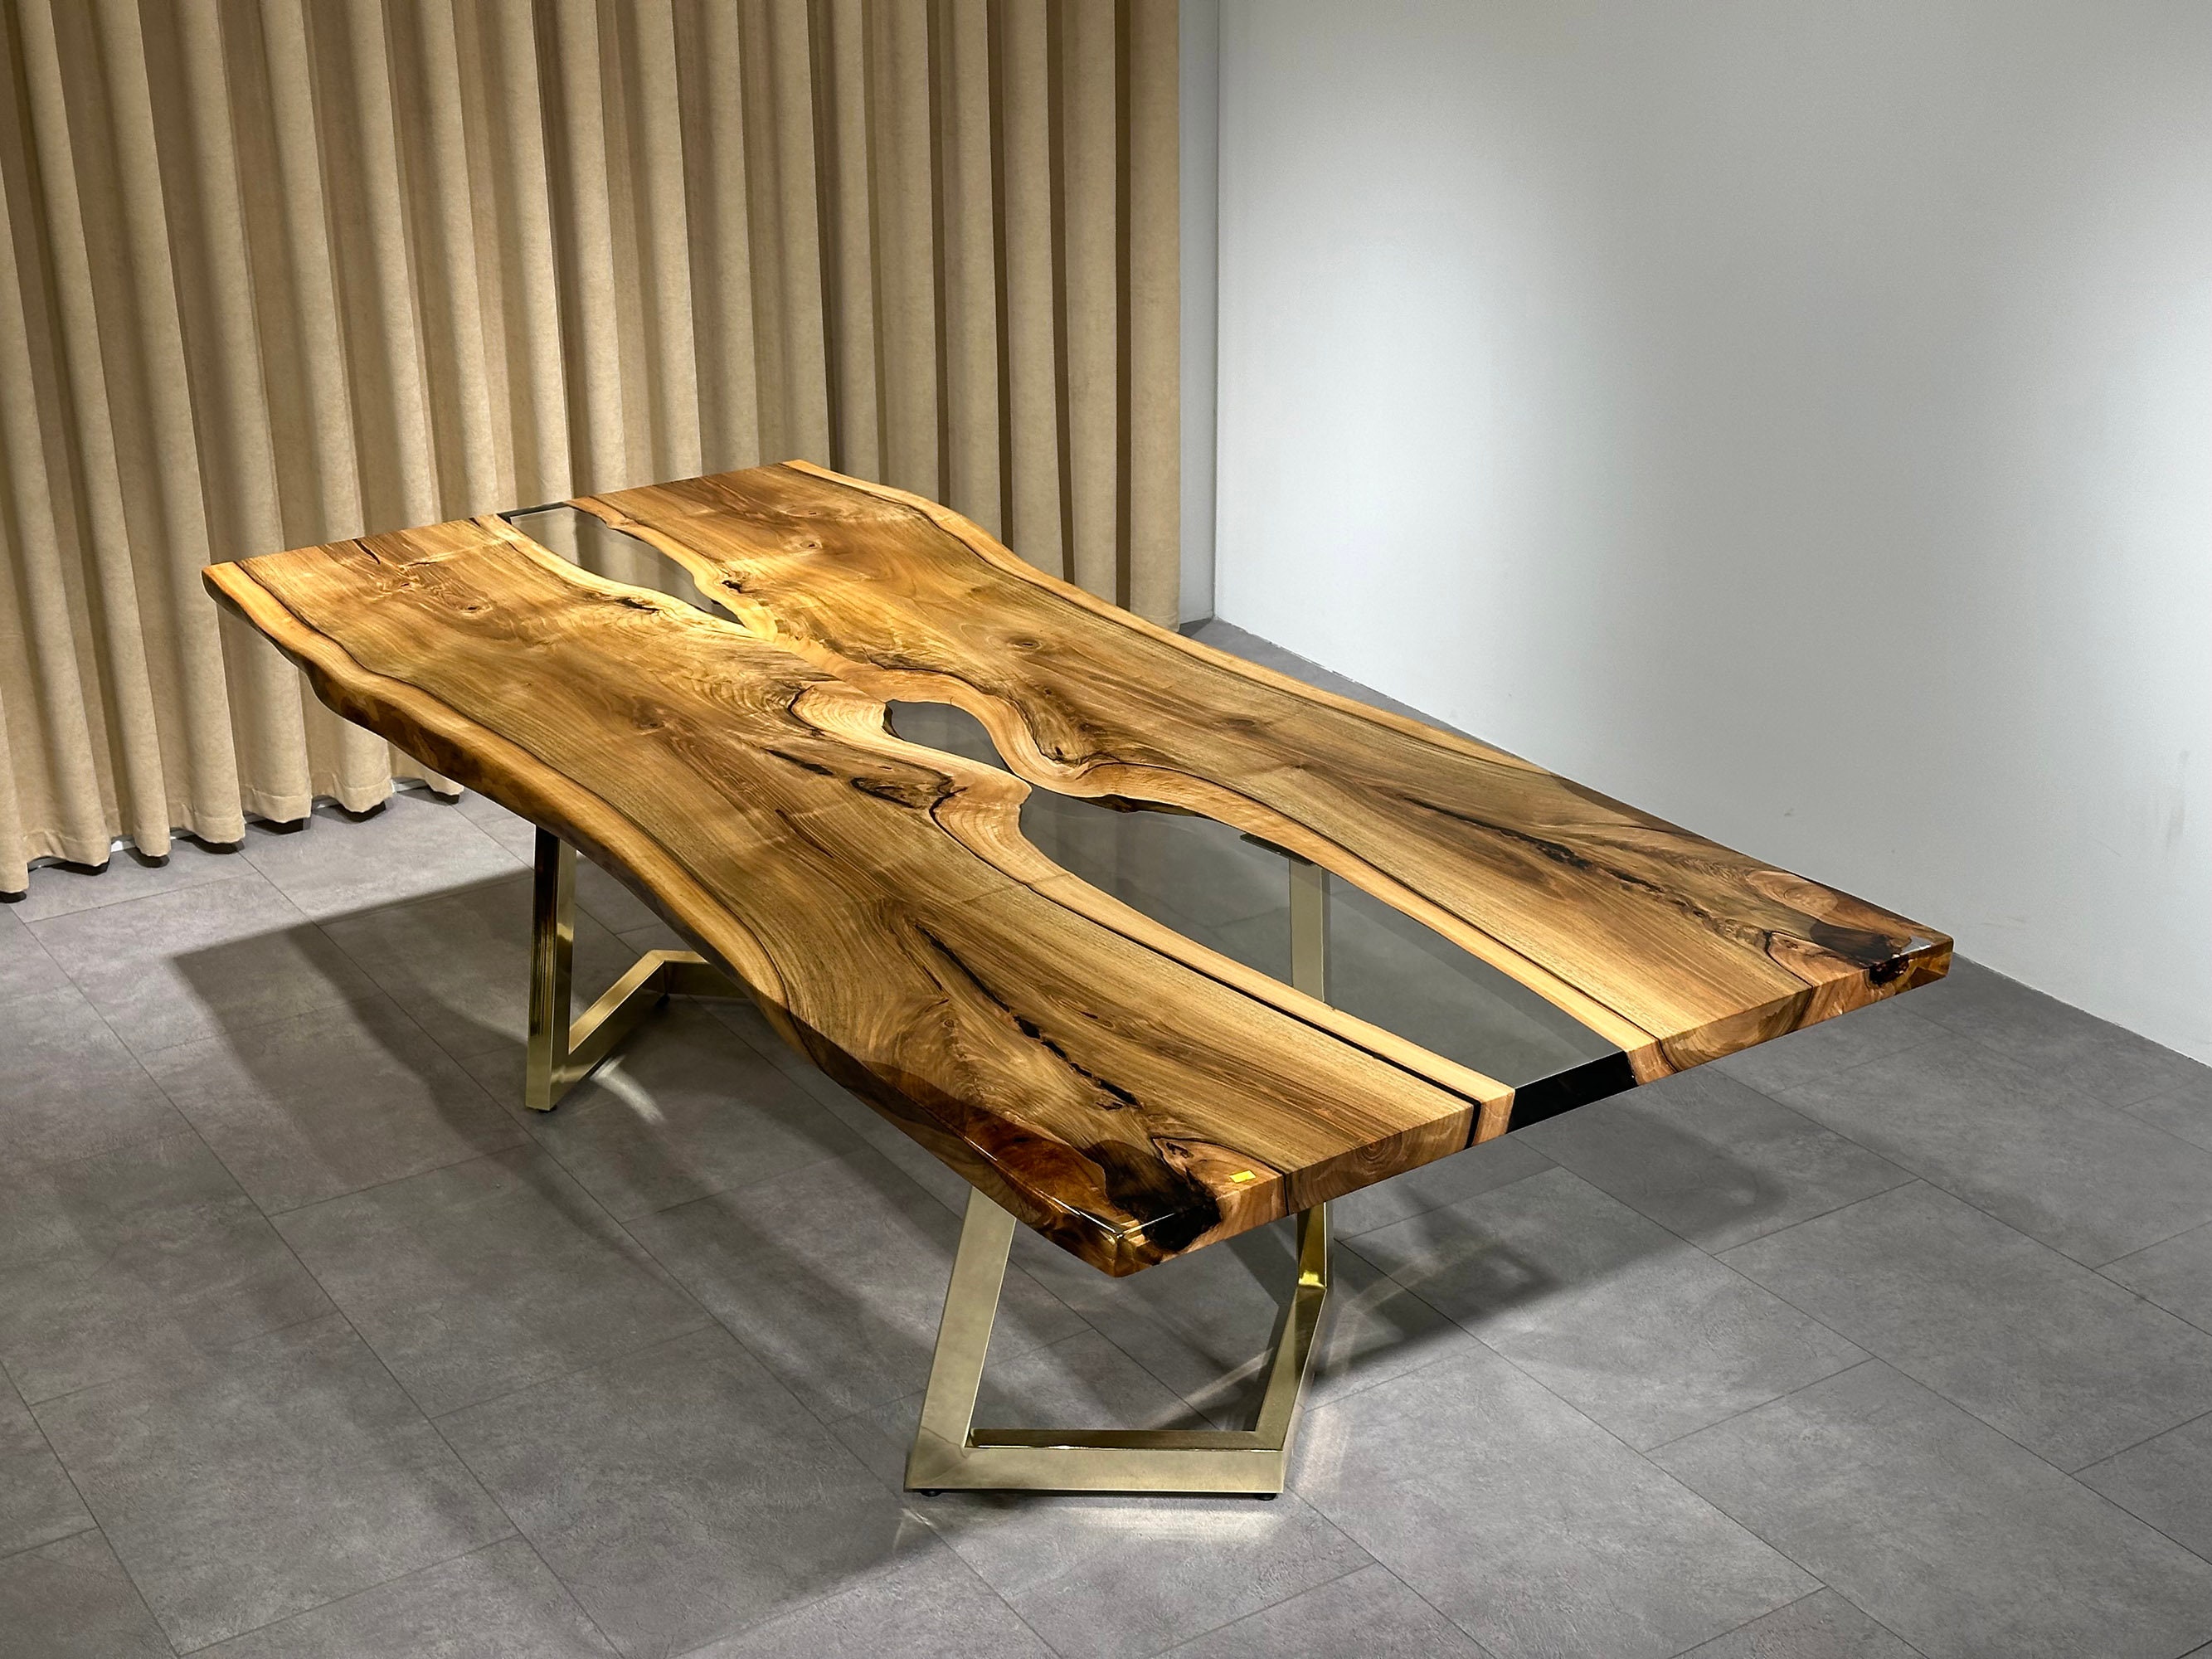 Walnut Epoxy Table, Epoxy Resin Table, Epoxy River Table, Table Top Epoxy,  Resin Table Top, Wood Resin Table, Resin Dining Table, Live Edge 